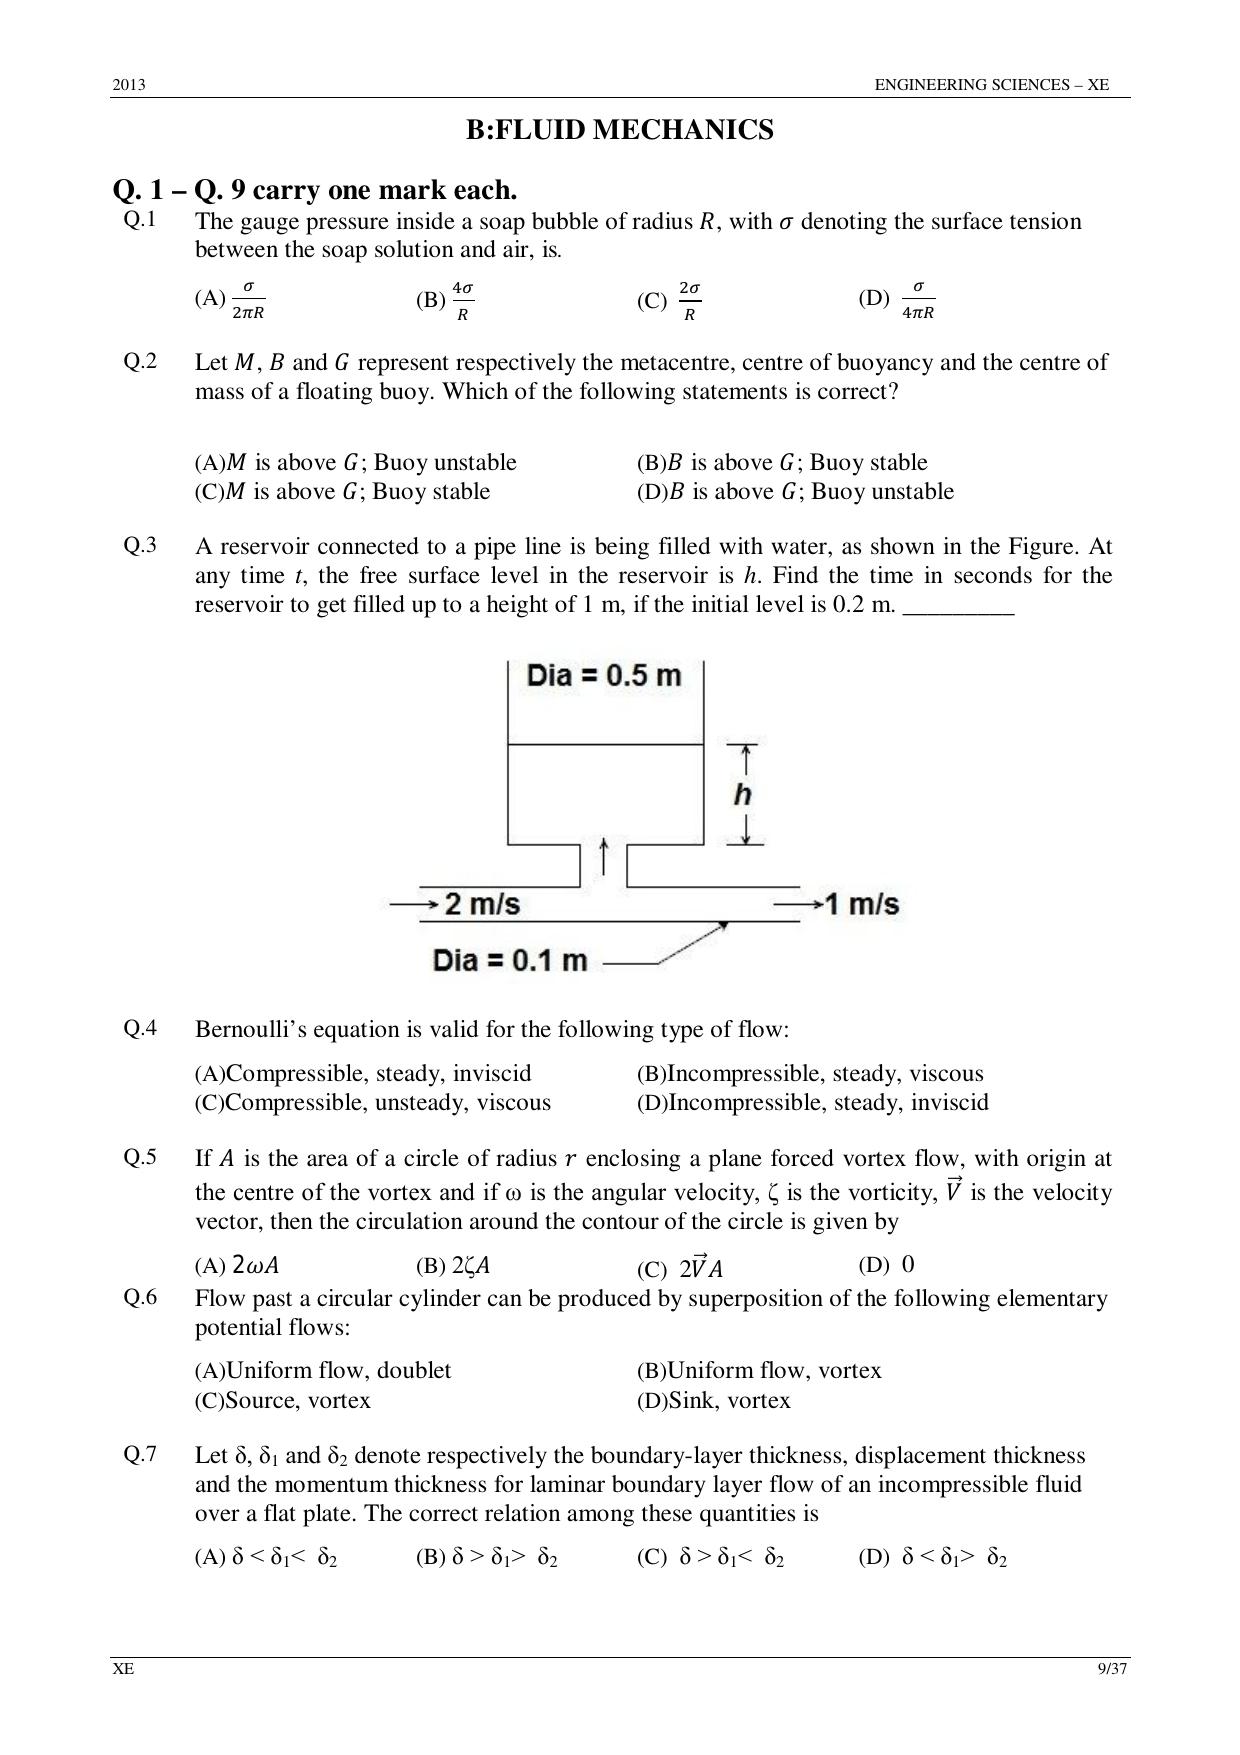 GATE 2013 Engineering Sciences (XE) Question Paper with Answer Key - Page 9